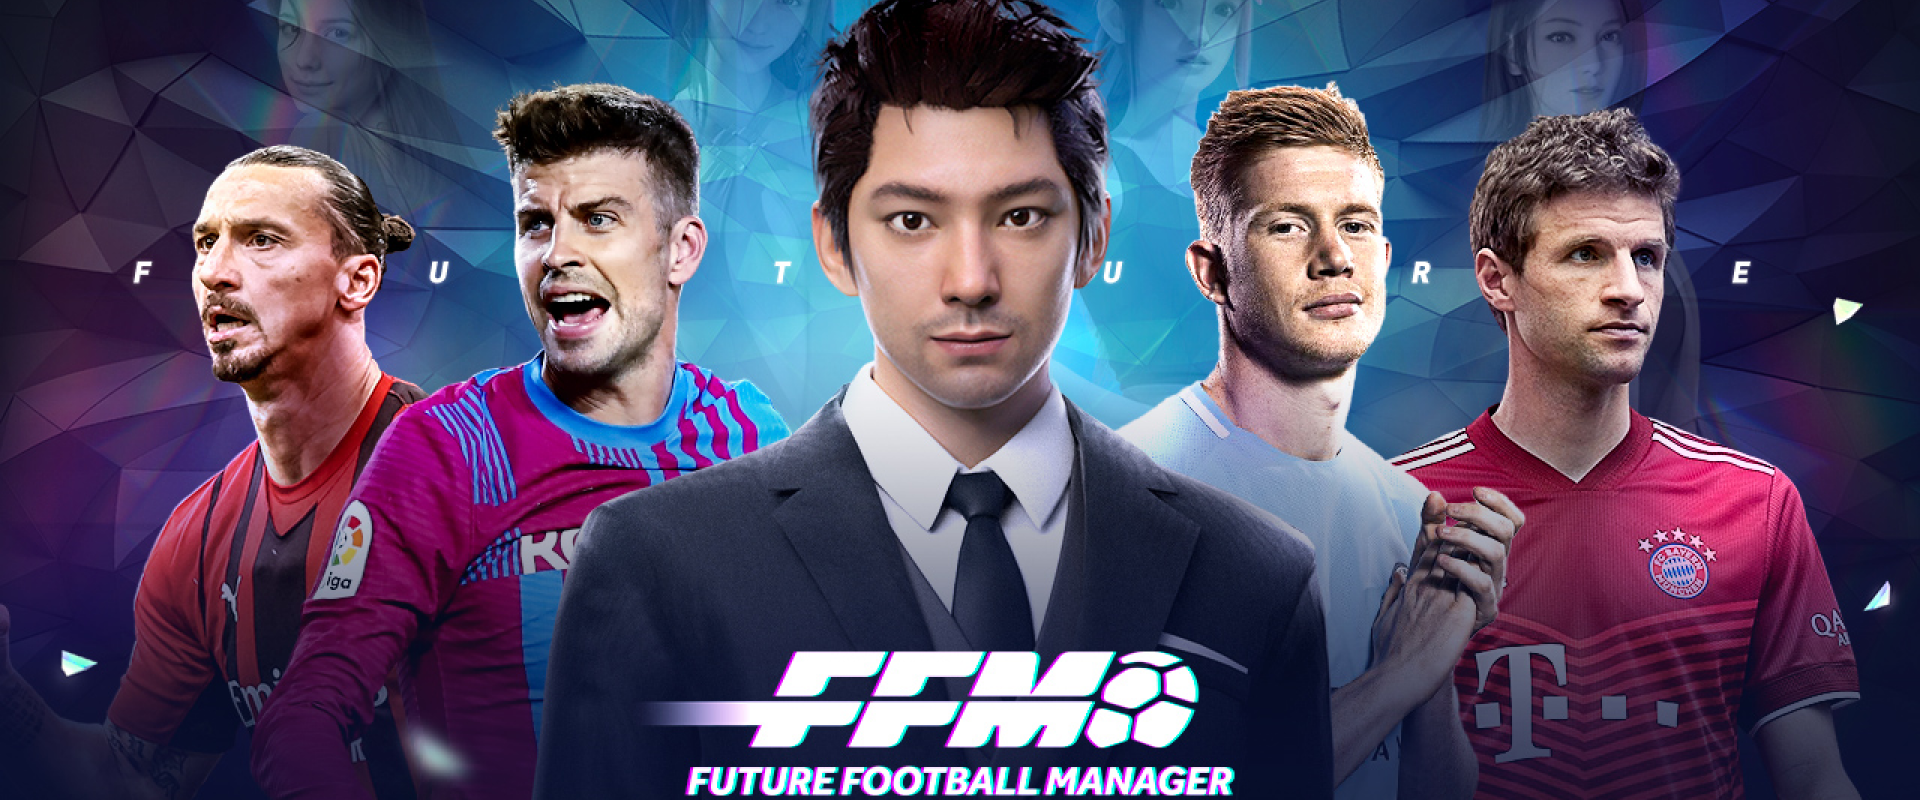 Download & Play Football Manager 2022 Mobile on PC & Mac (Emulator)